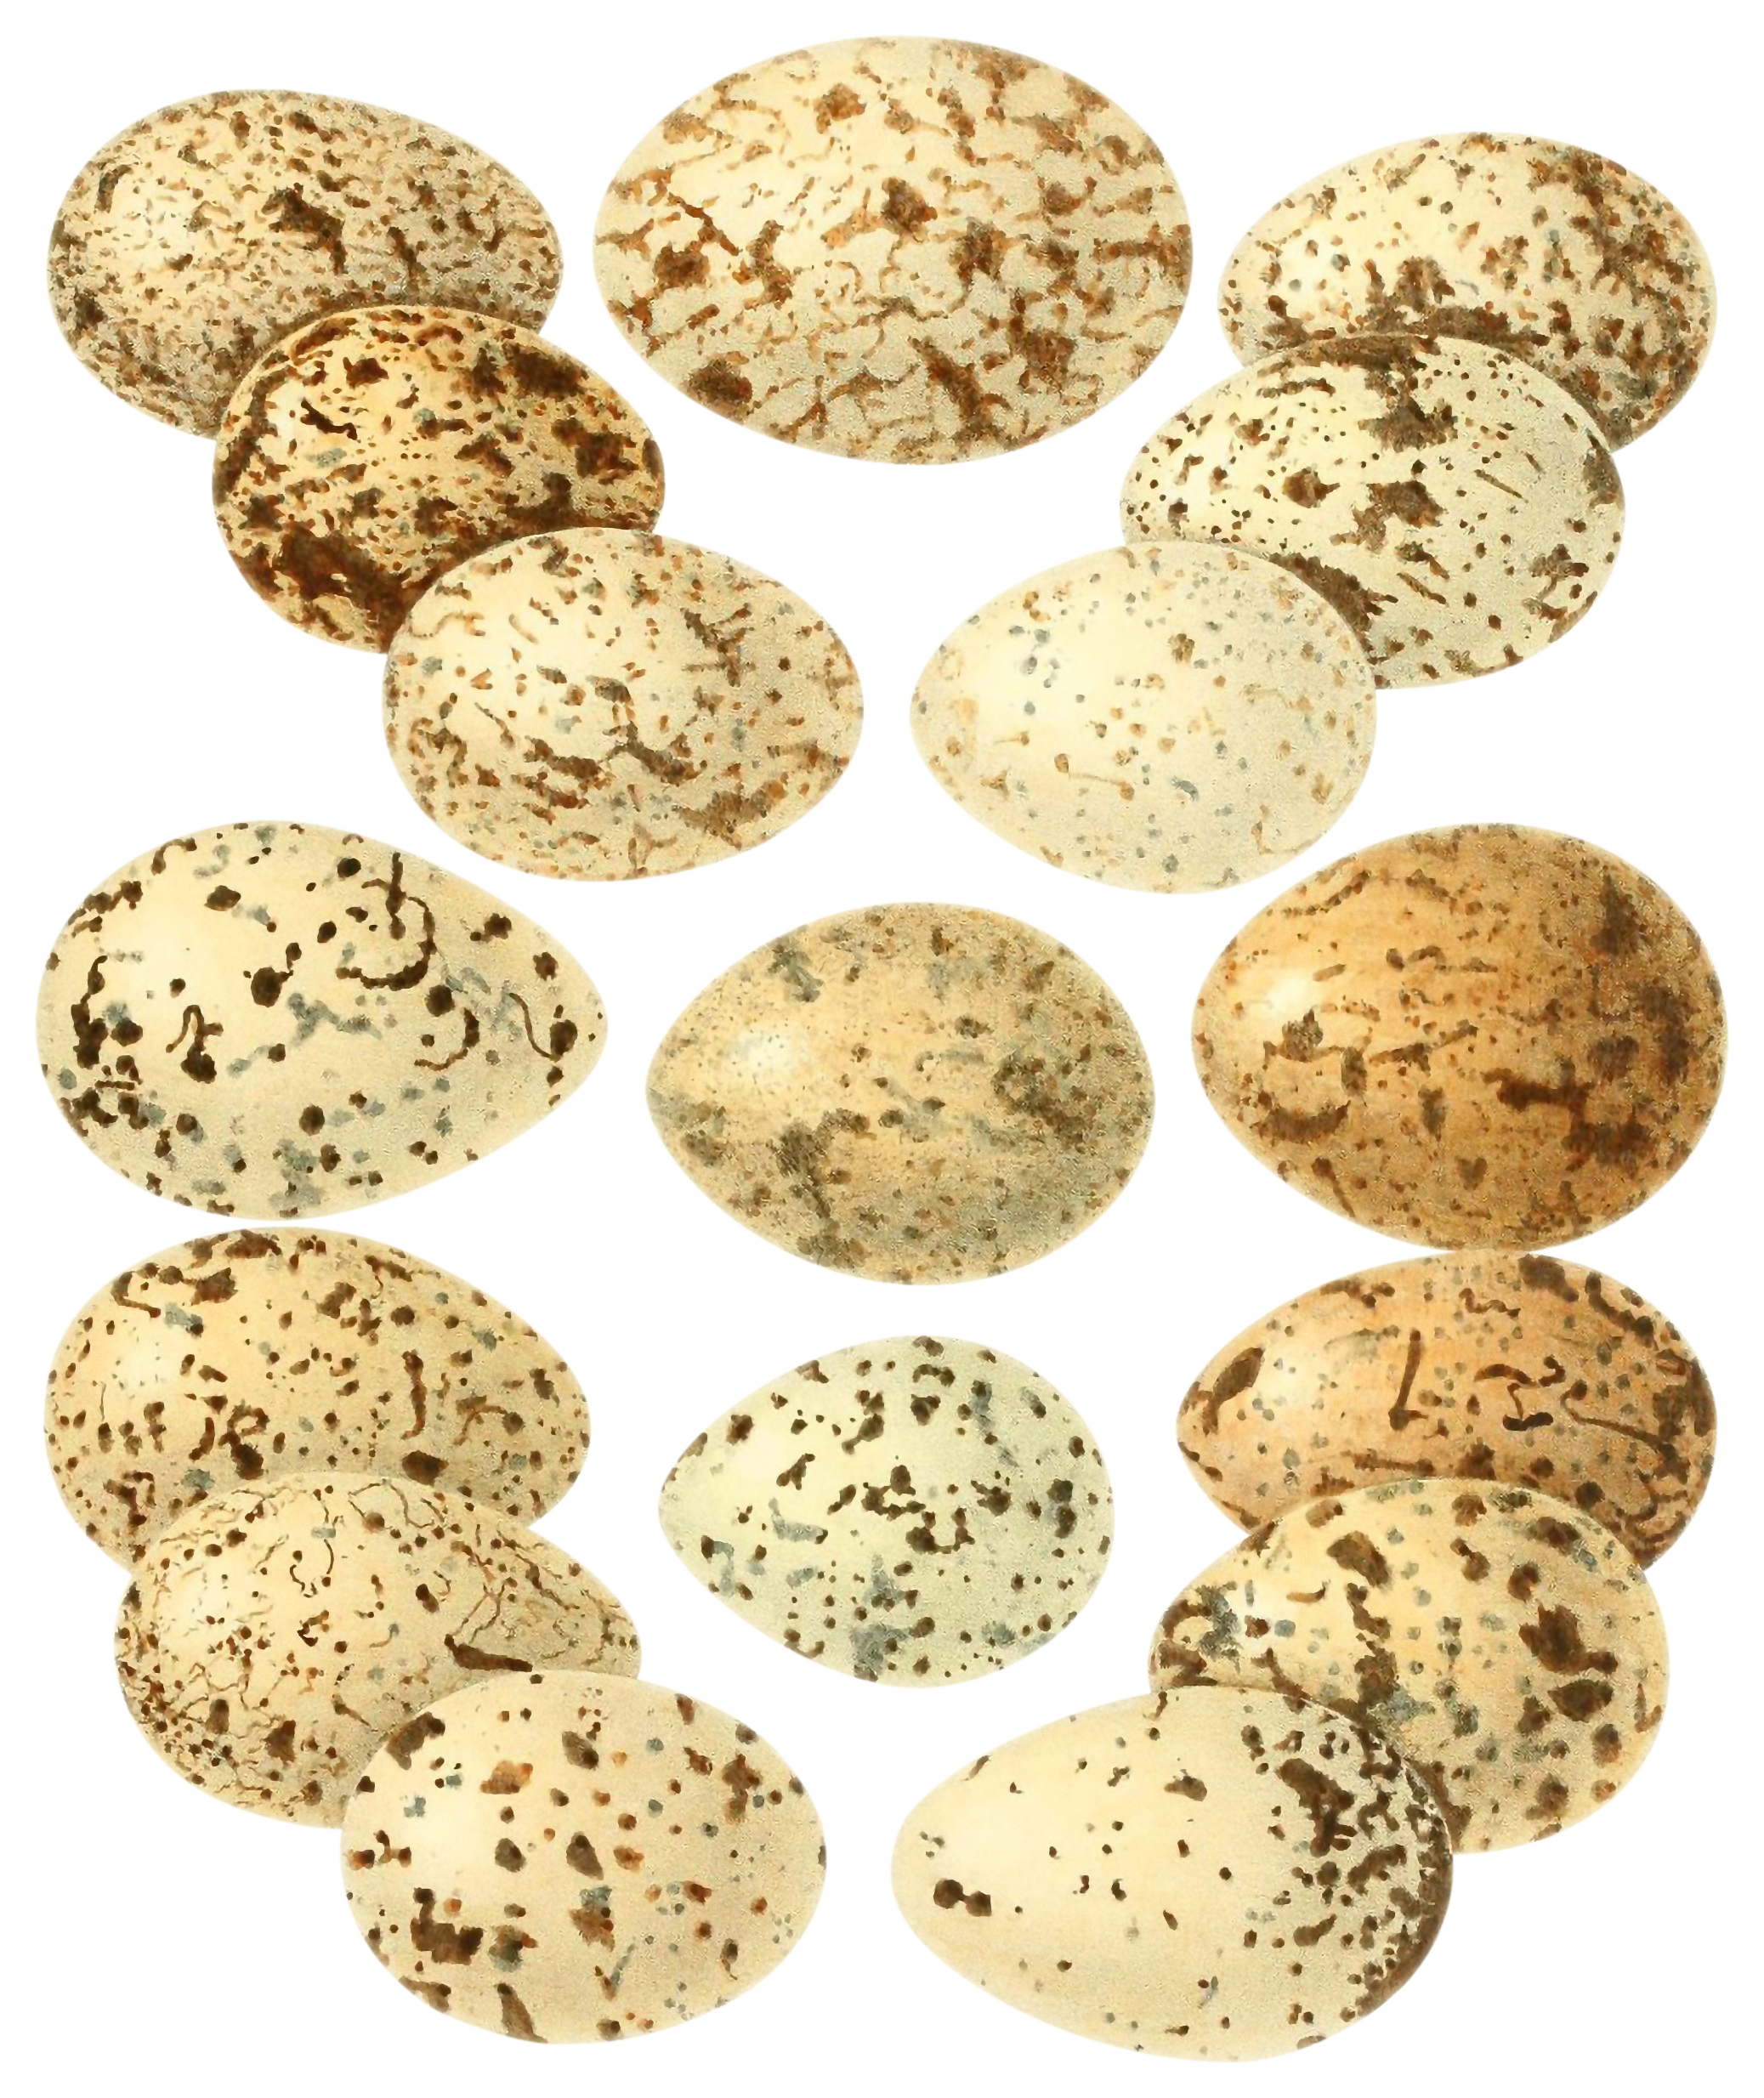 Illustrated diagram of various spotted bird eggs.